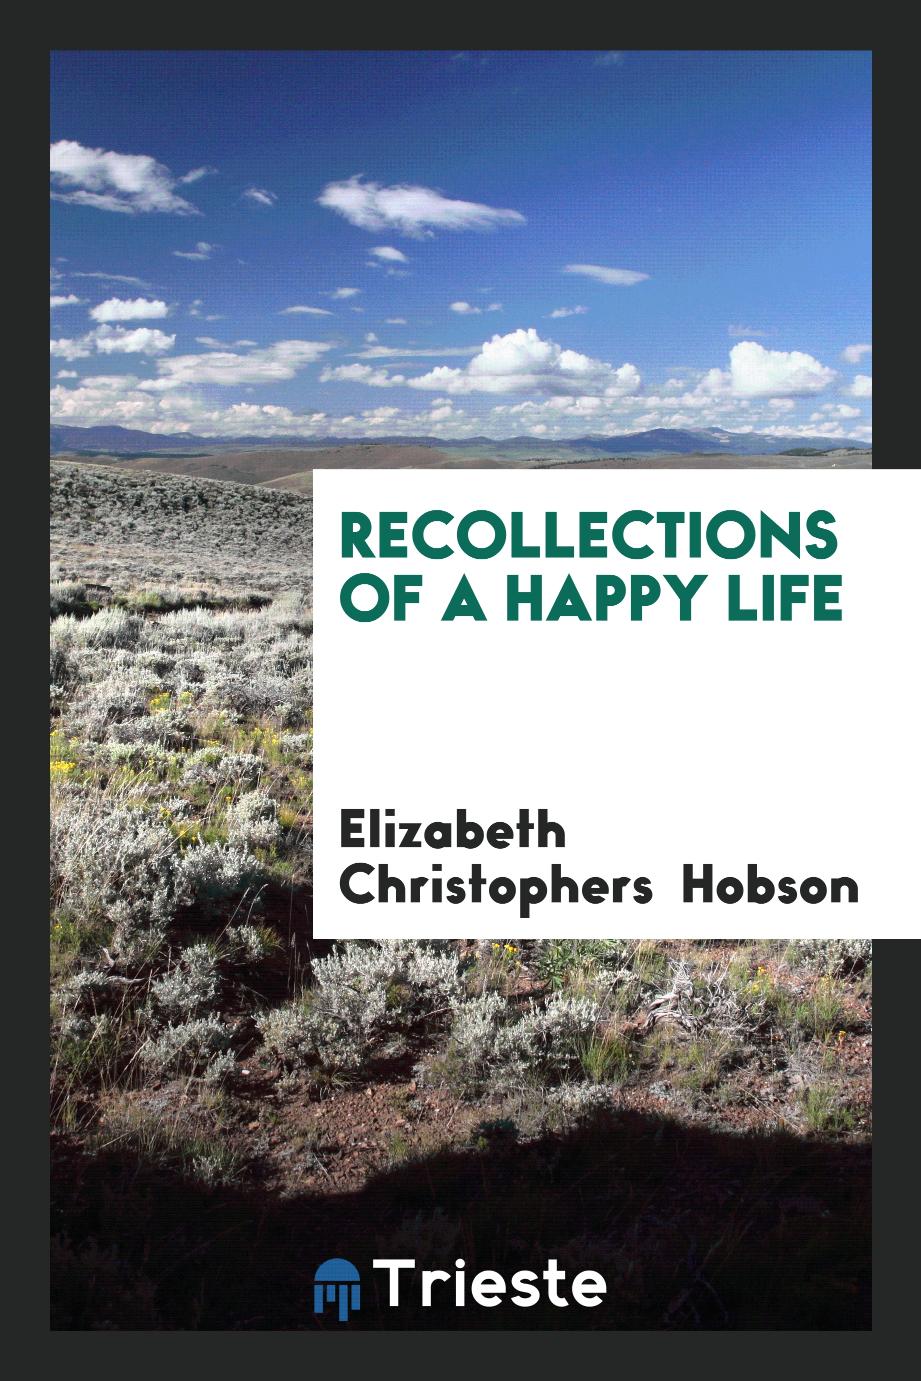 Recollections of a happy life